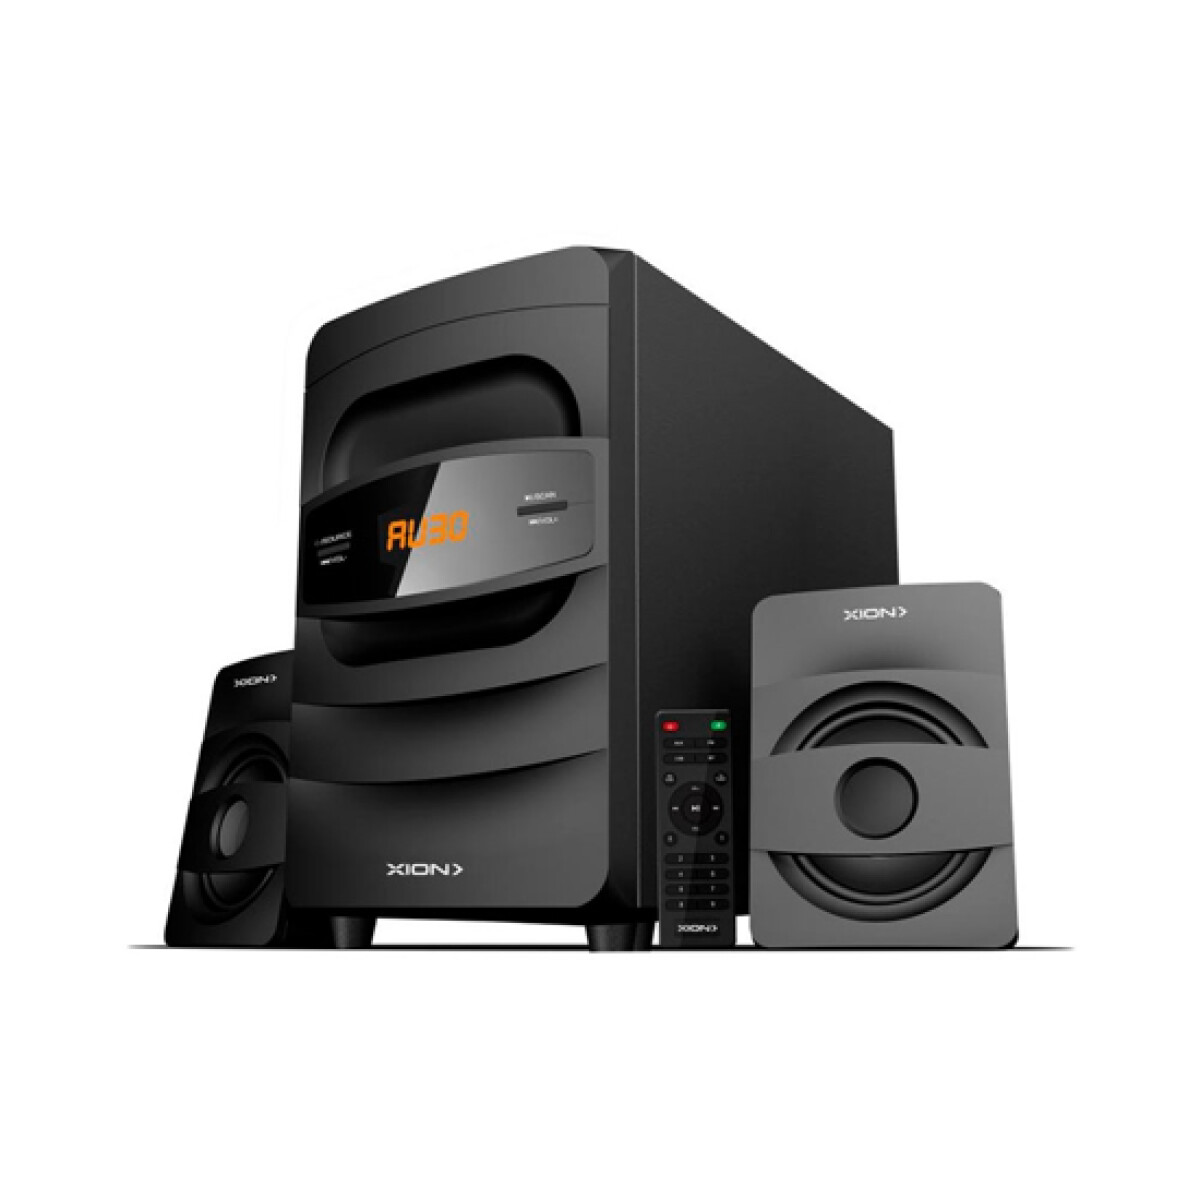 Home Theater Xion 2.1 XI-HT360 3600W - 001 